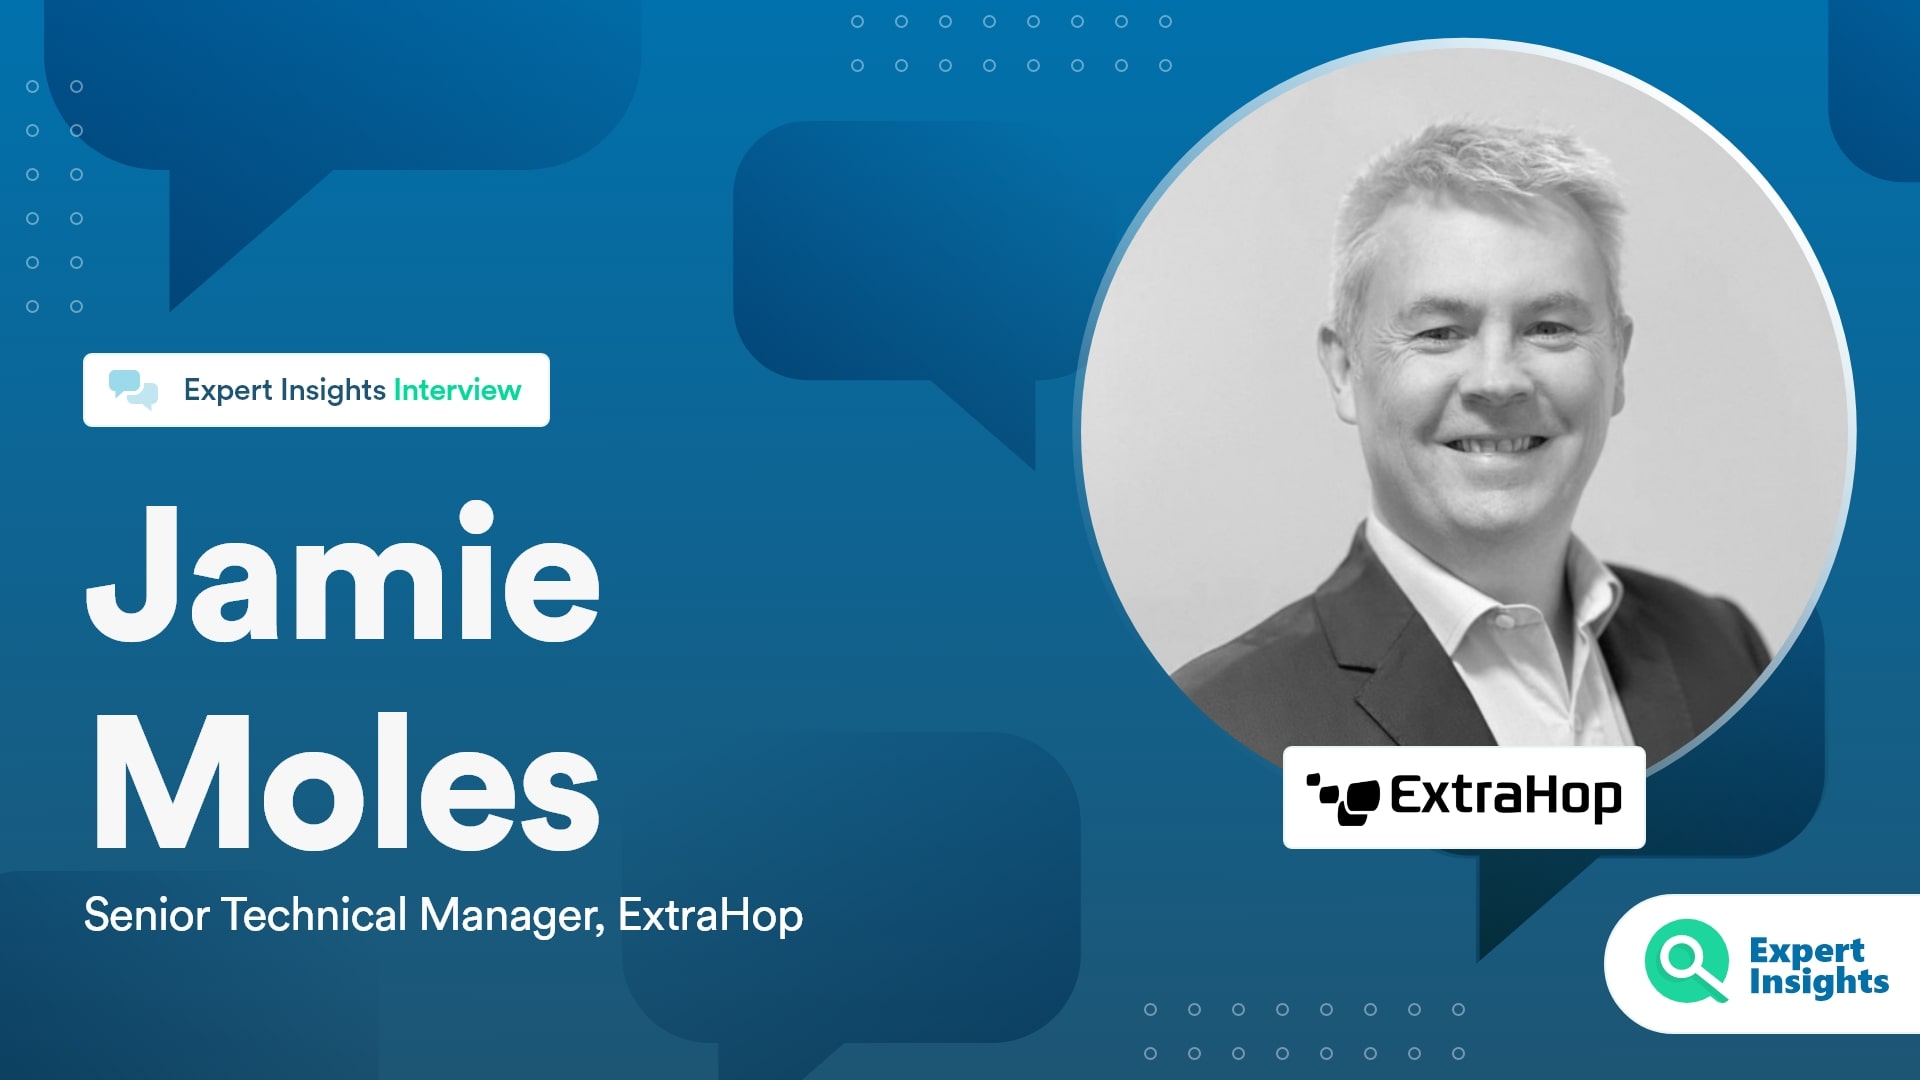 Expert Insights Interview With Jamie Moles Of ExtraHop